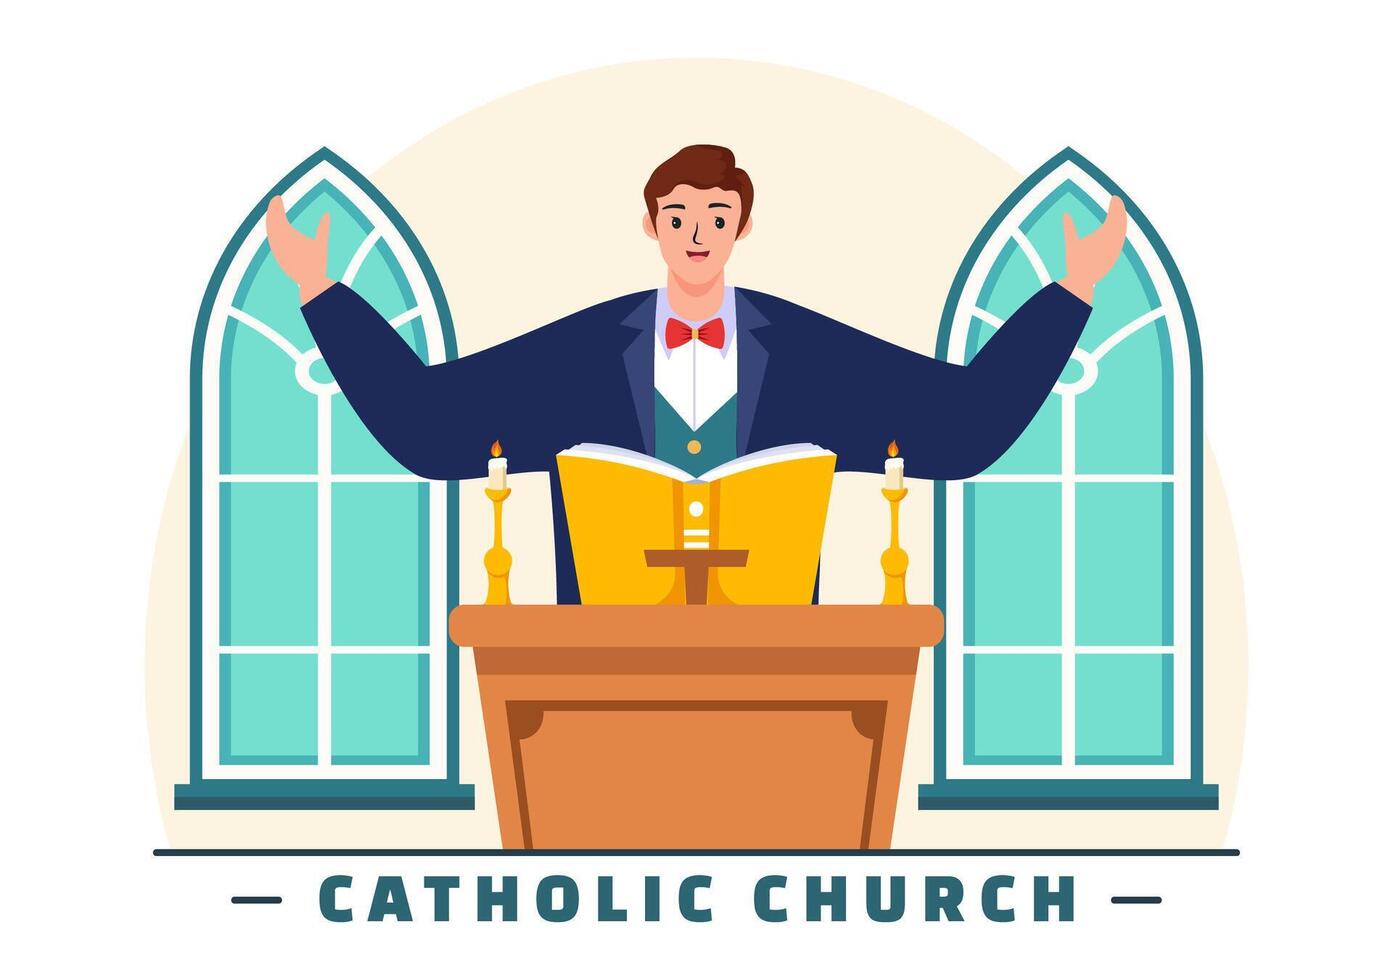 Cathedral Catholic Church Building Vector Illustration With Architecture, Medieval and Modern Churches Interior Design in Flat Cartoon Background